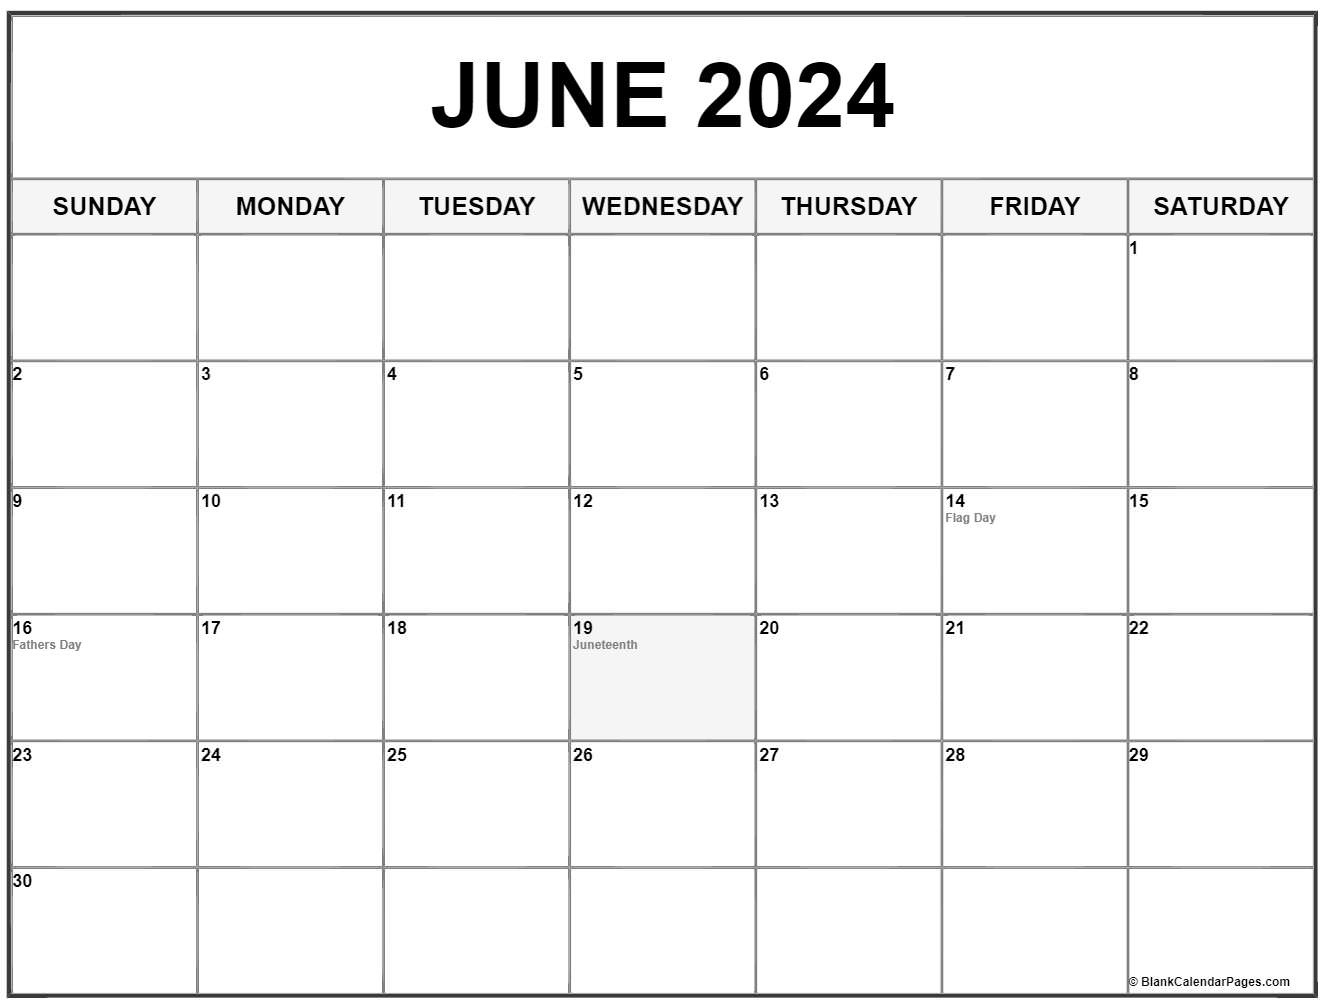 June 2024 With Holidays Calendar for Holidays In June 2024 Calendar